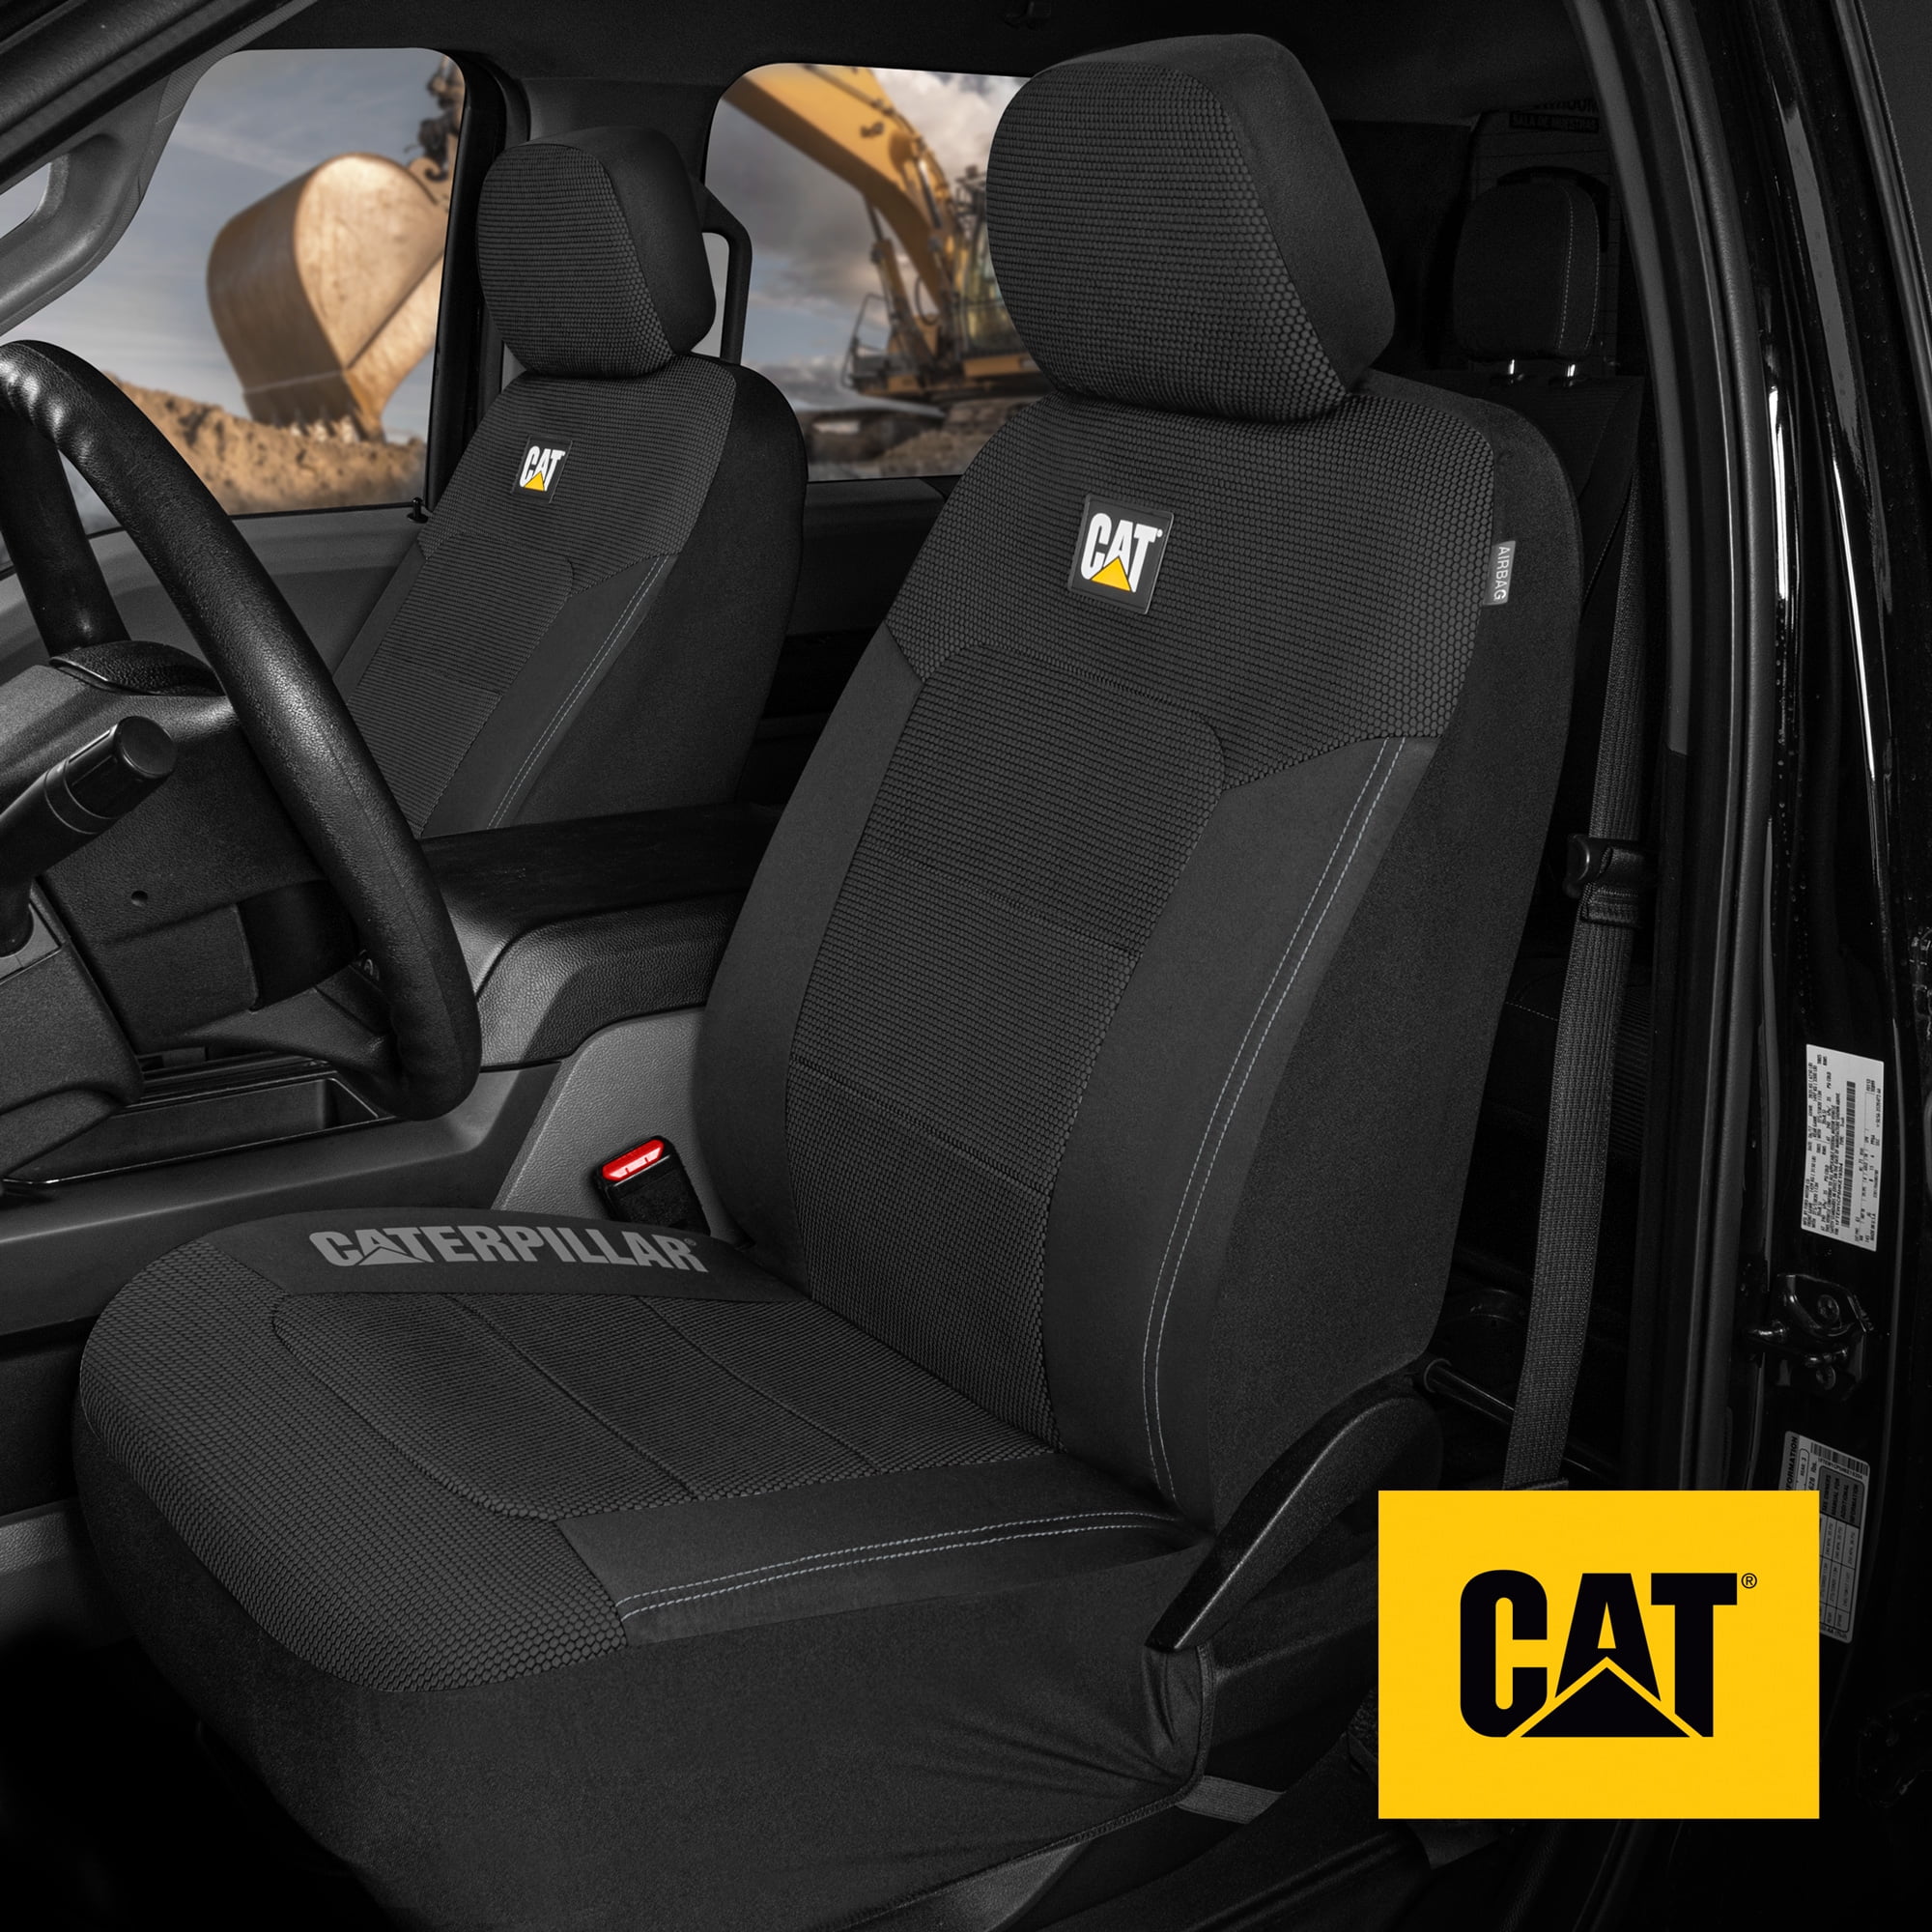 Caterpillar MeshFlex Automotive Seat Covers for Cars Trucks and SUVs (Set  of 2) – Black Car Seat Covers for Front Seats, Truck Seat Protectors with